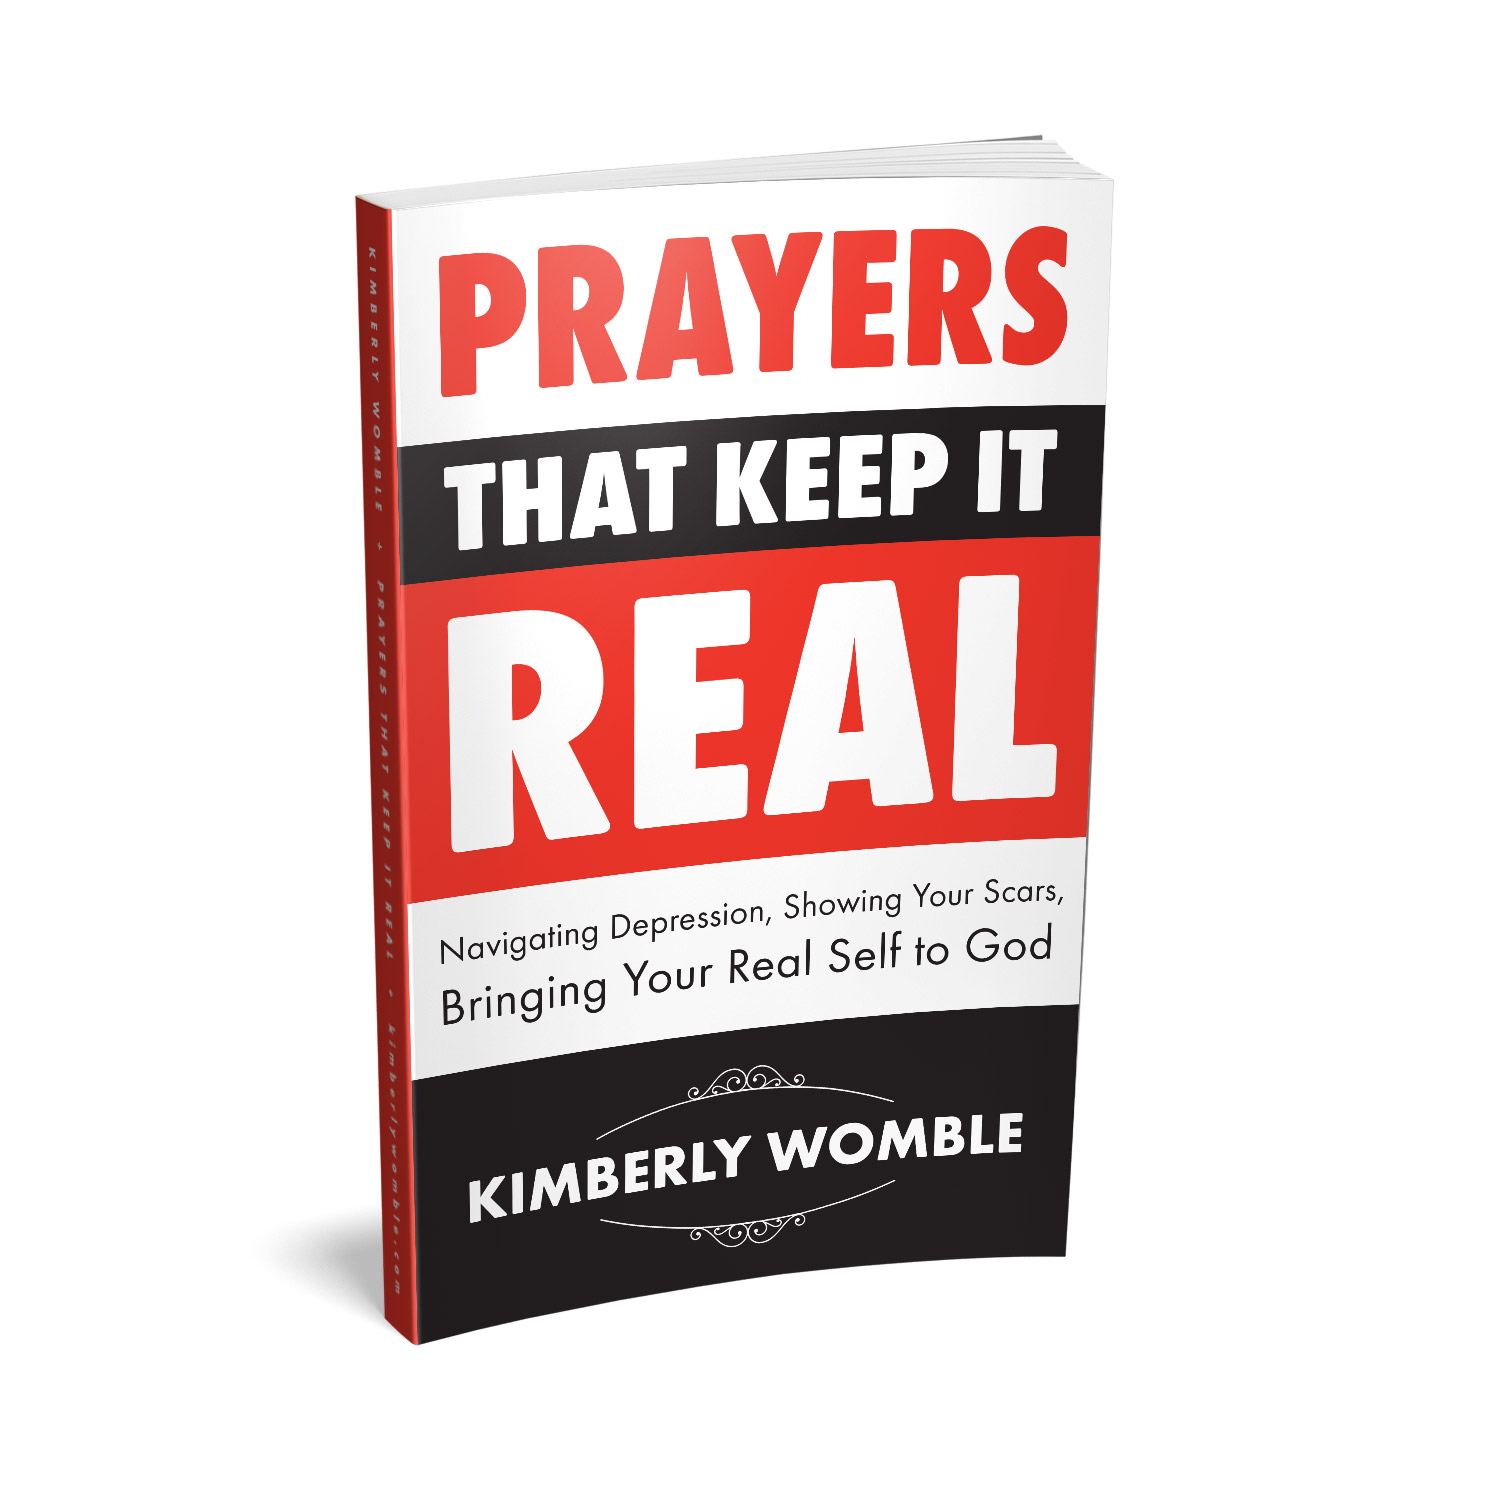 'Prayers That Keep It Real' is a faith-based, self-help book. The author is Kimberly Womble. The book cover & interior design are by Mark Thomas. To learn more about what Mark could do for your book, please visit coverness.com.